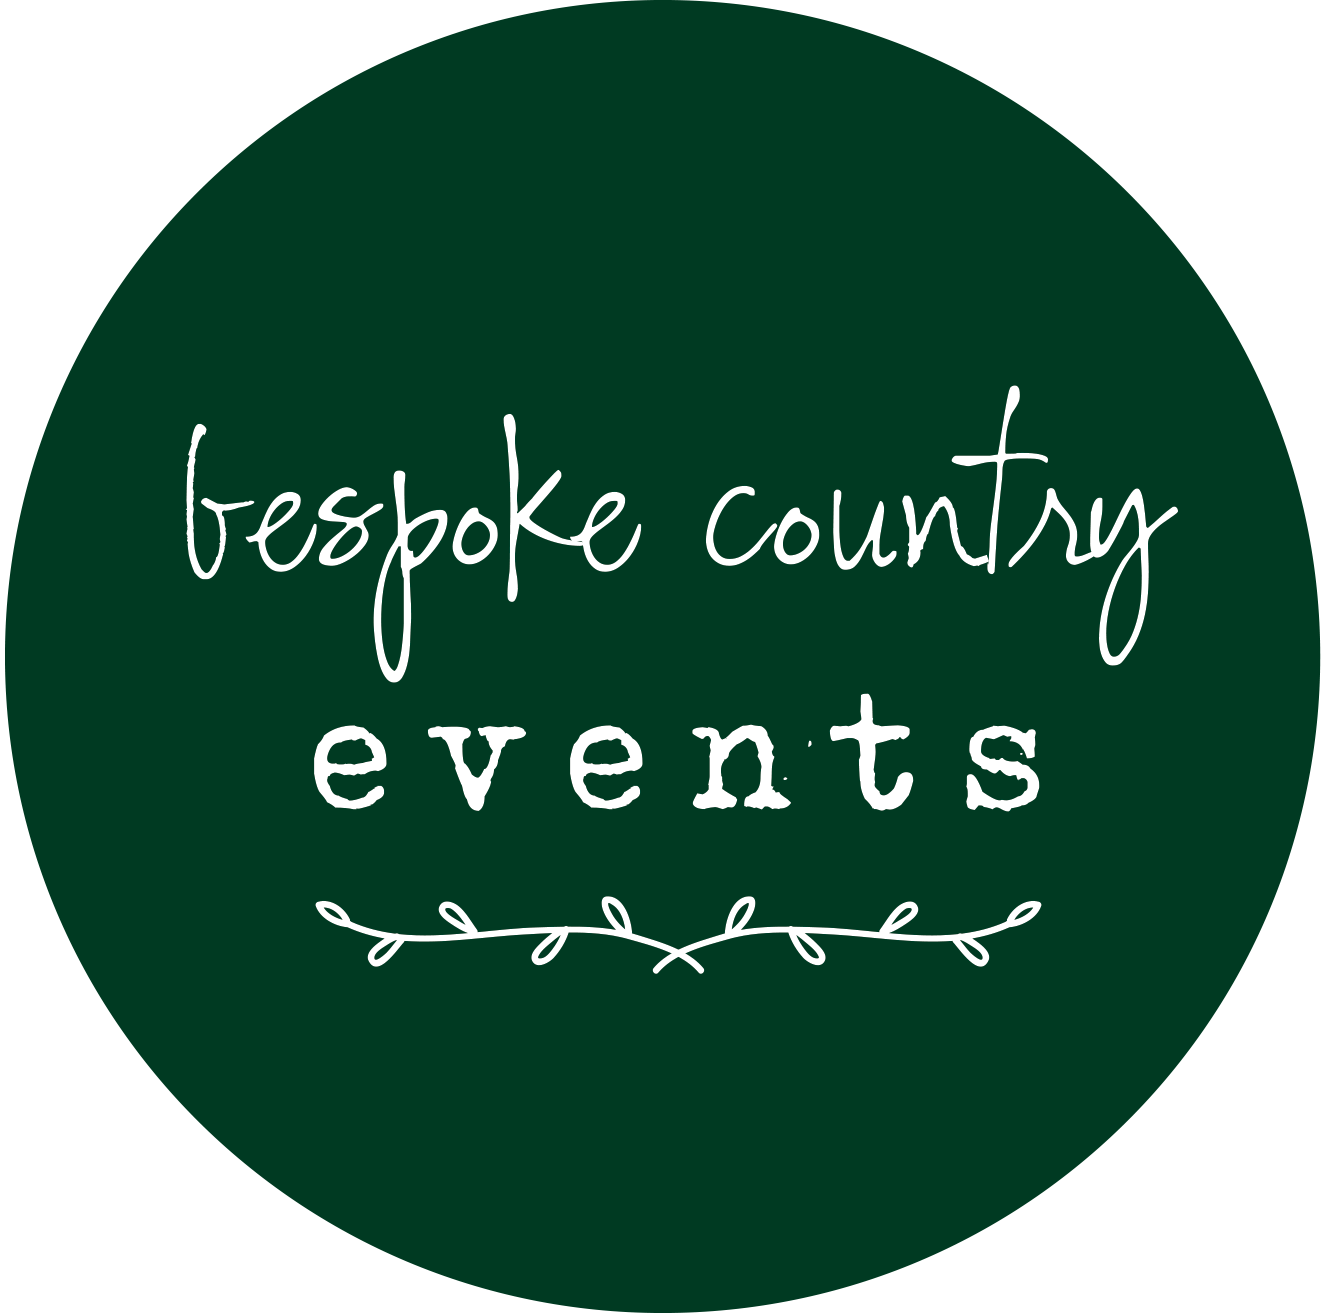 Bespoke Country Events